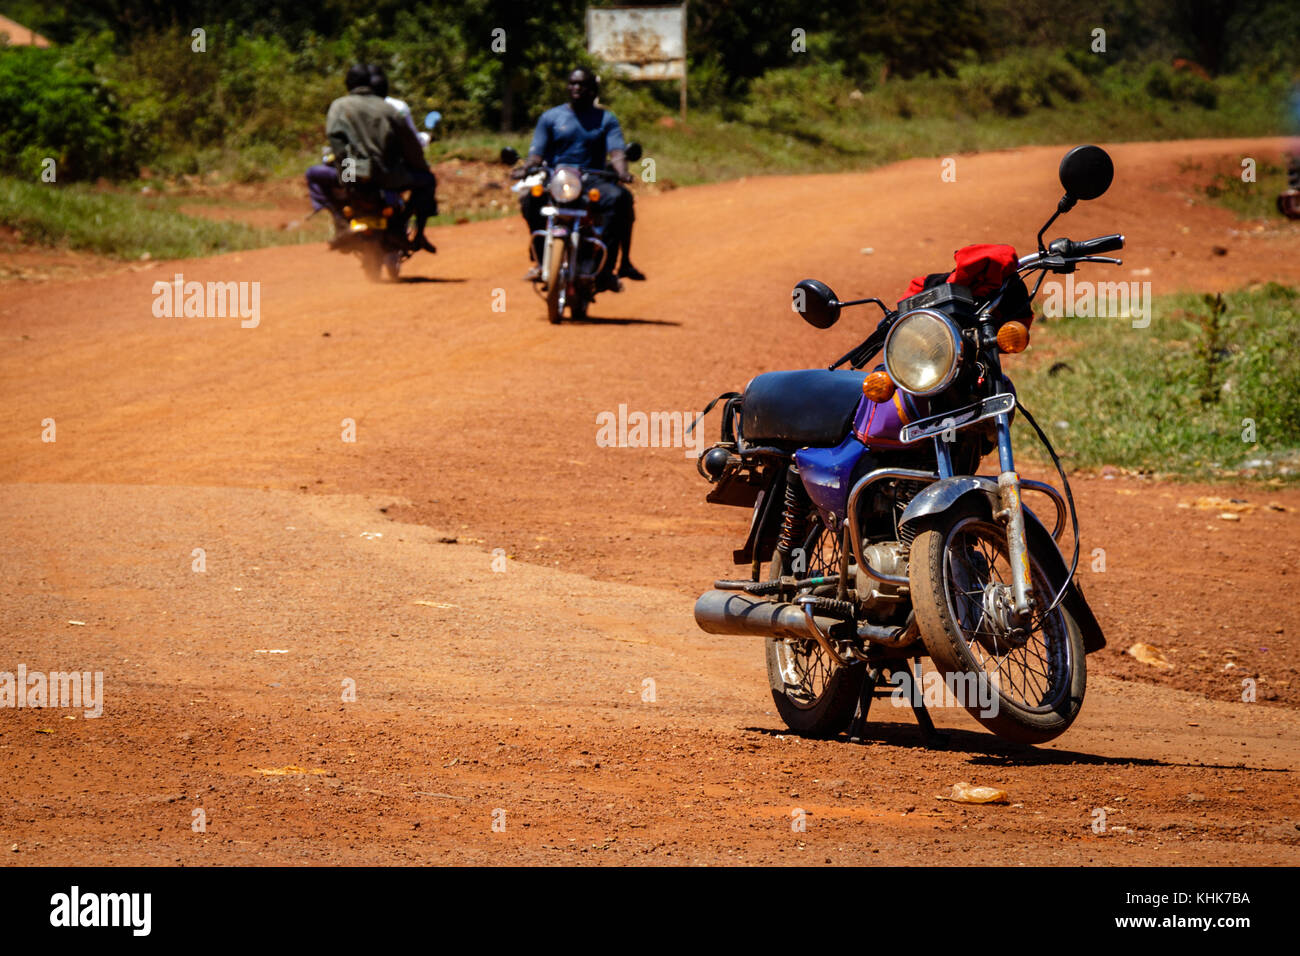 Boda boda are bicycle & motorcycle taxis commonly found in East Africa. These Boda Boda are waiting for customers Stock Photo